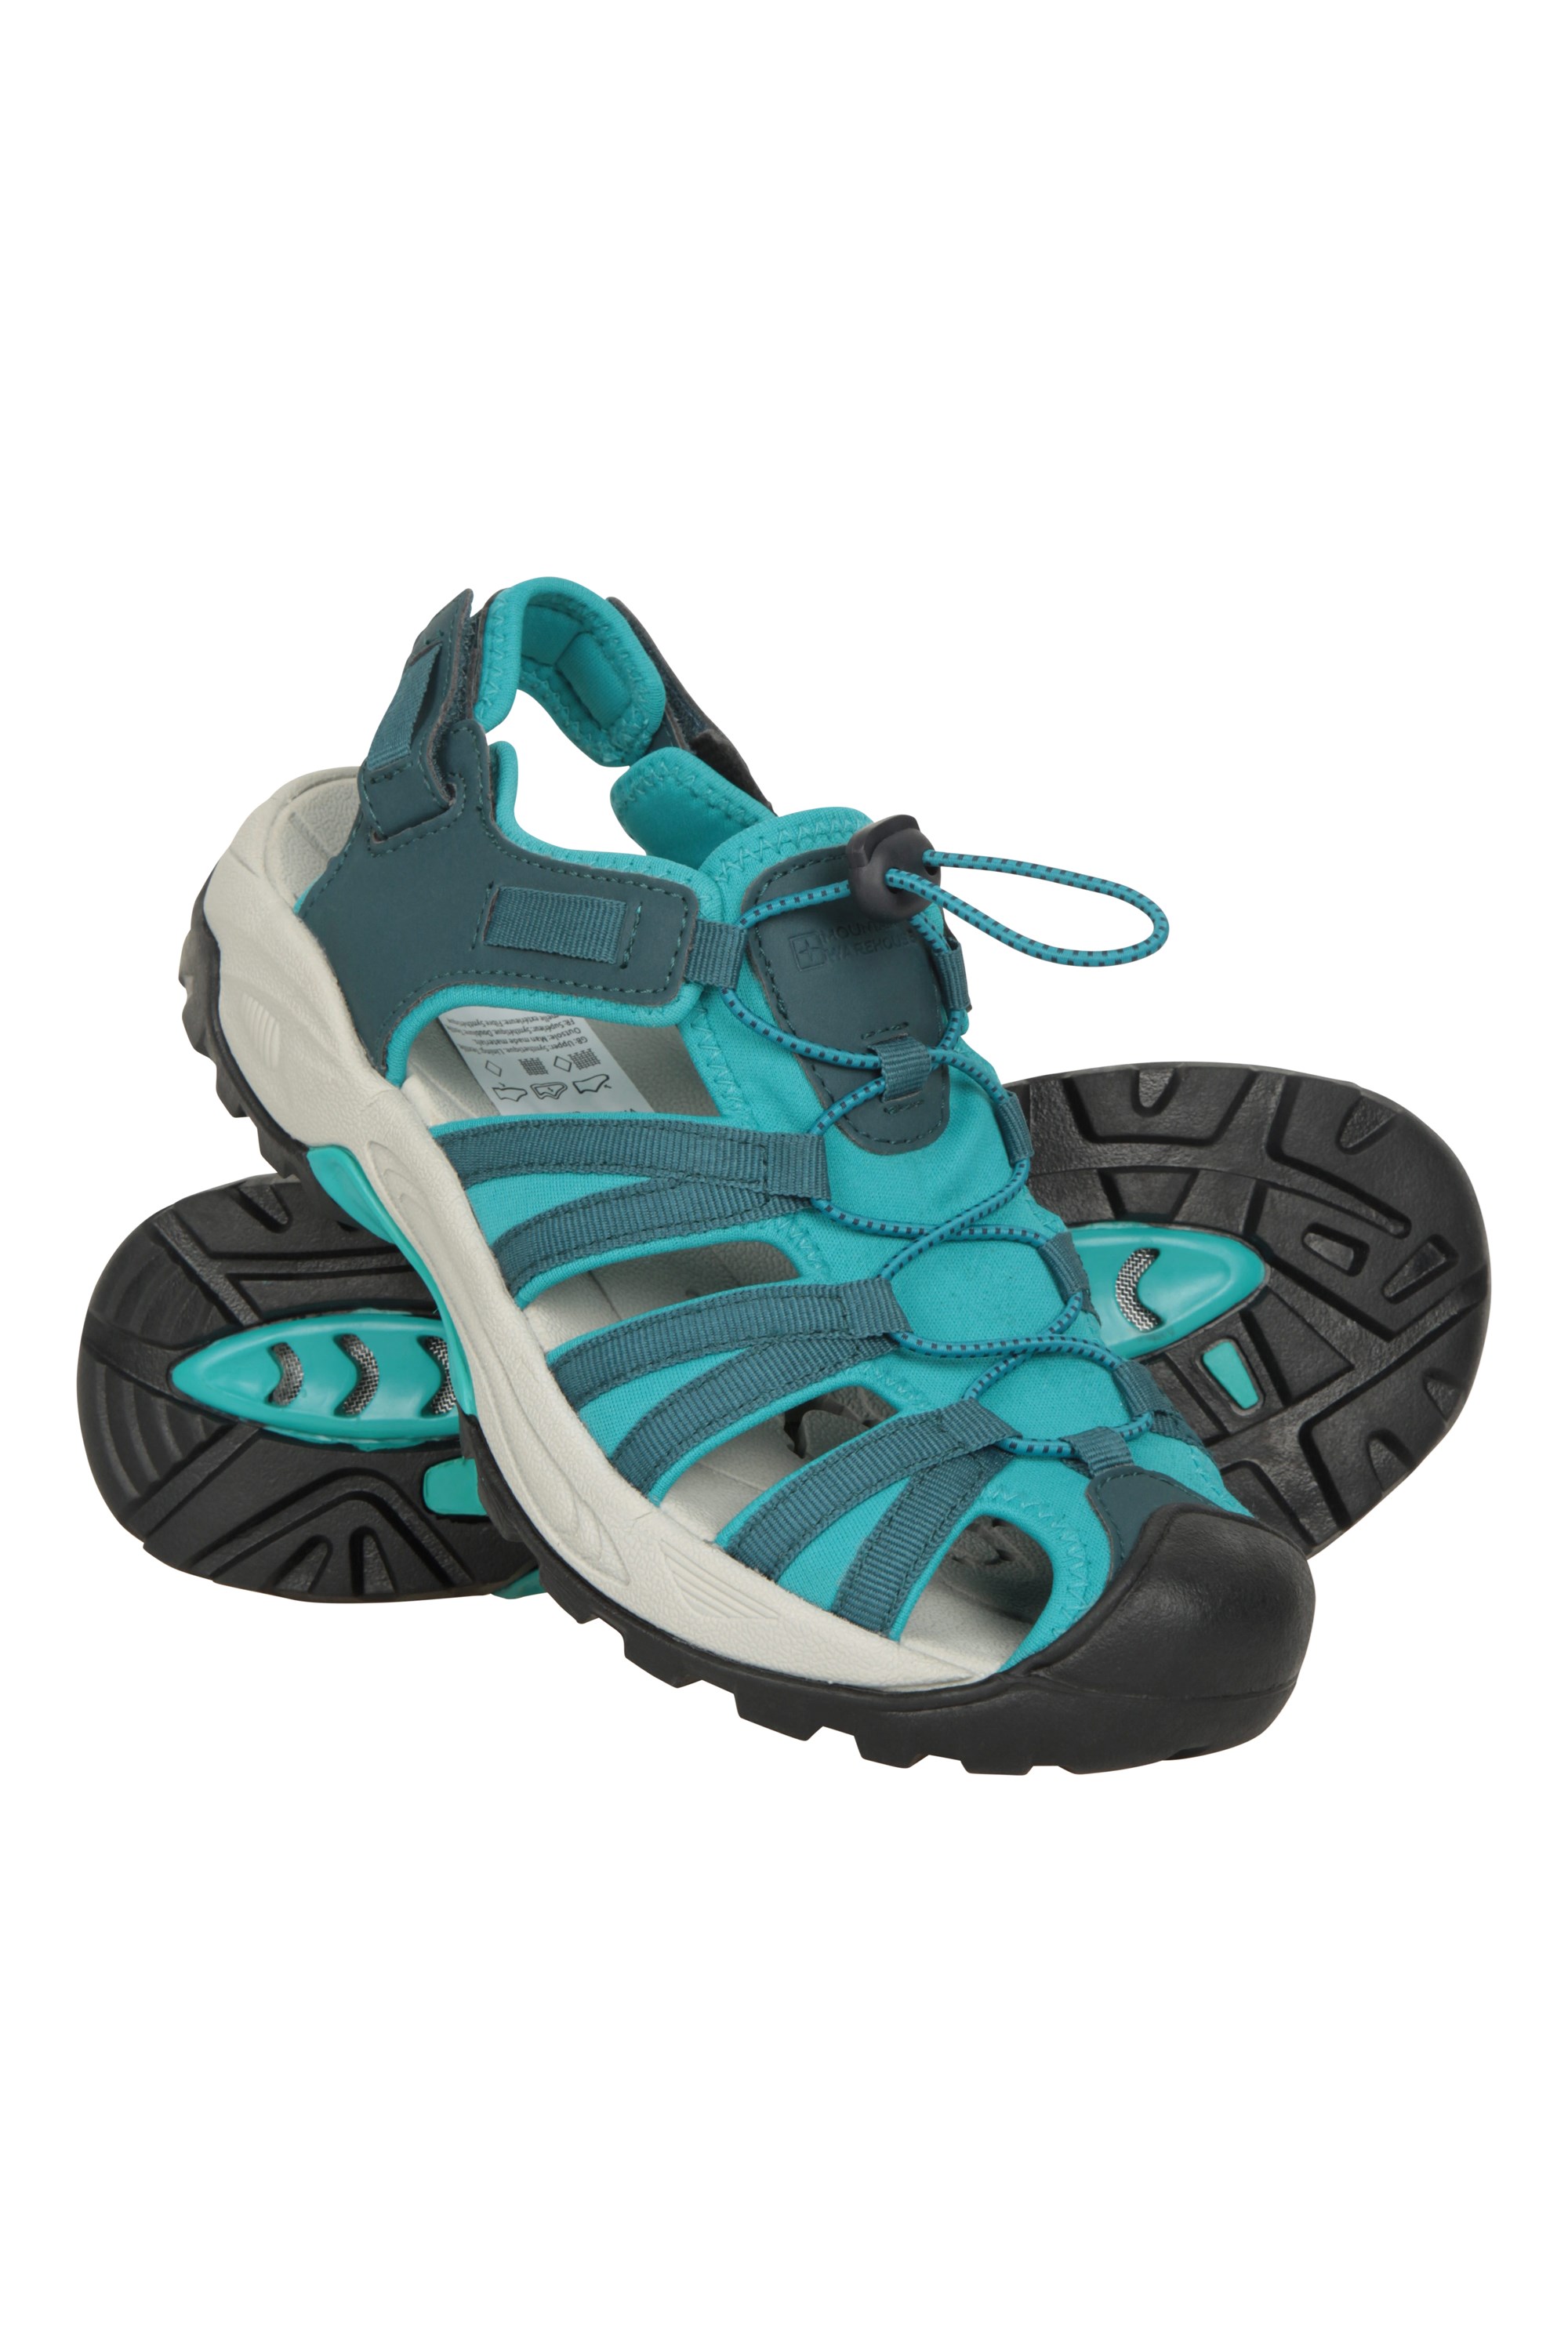 Womens Seaside Drainage Outsole Mountain Warehouse Shandals - Teal